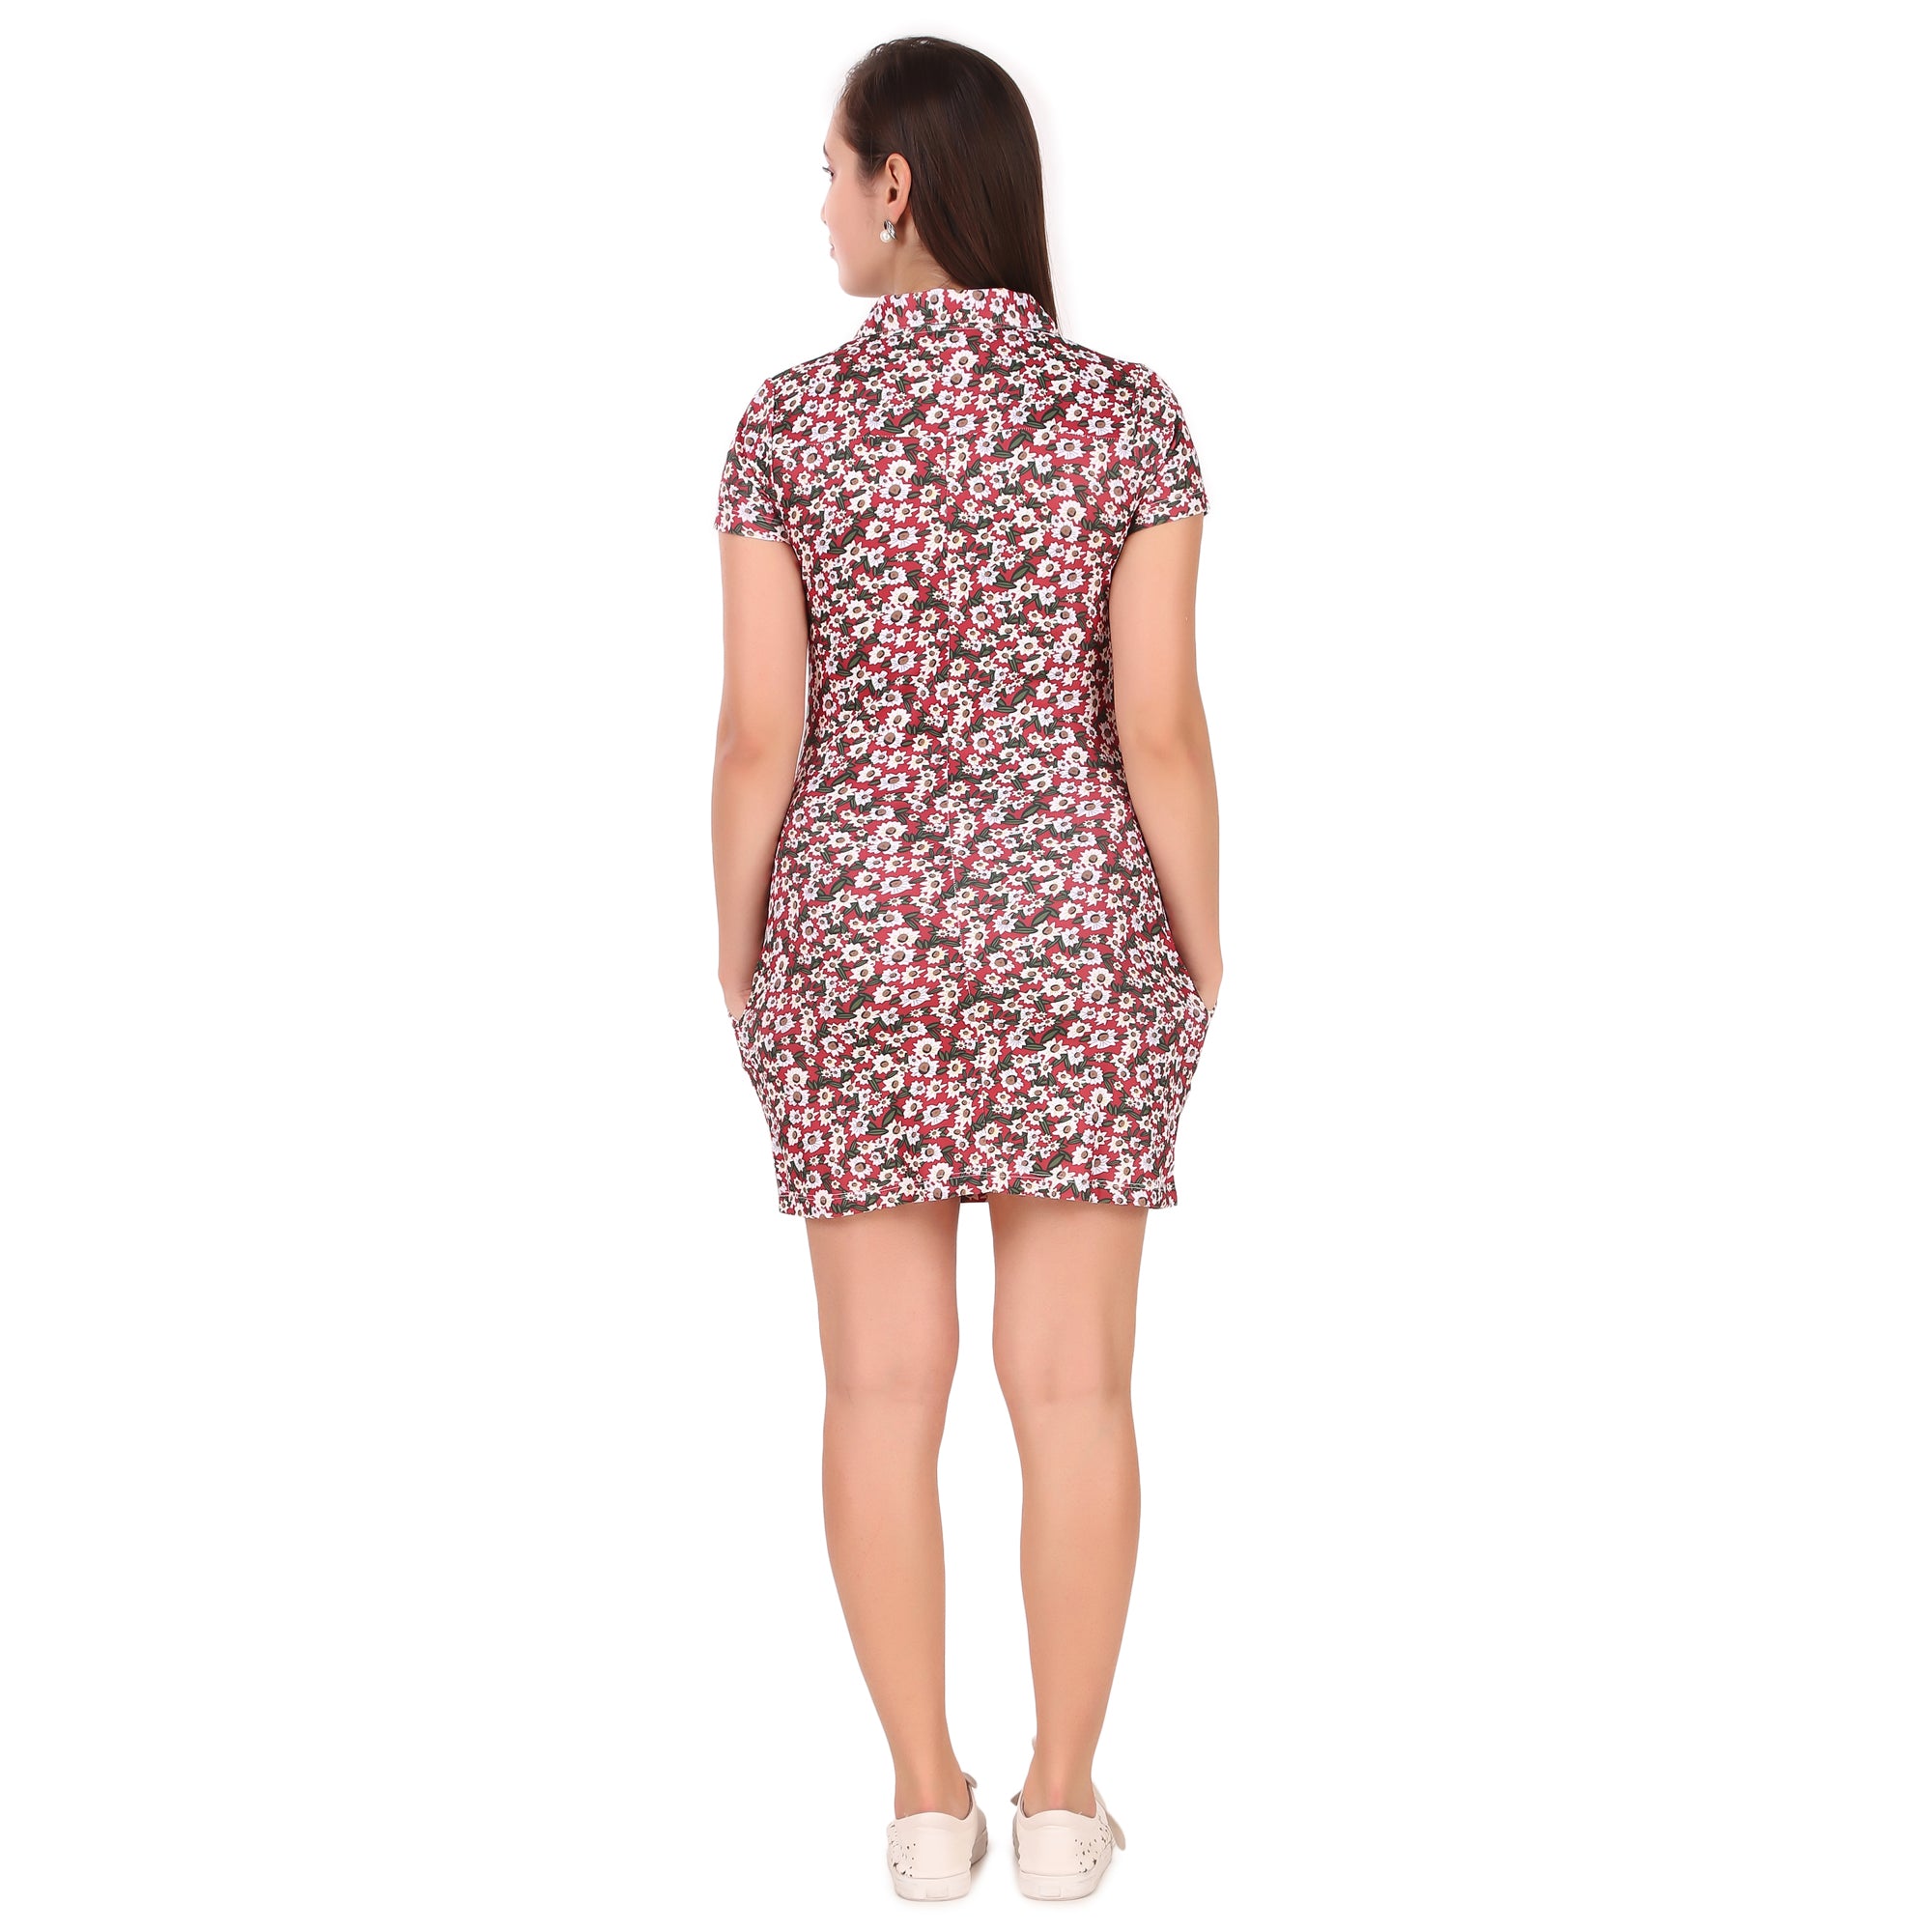 Activewear Collar Neck Dress For Women (Red Floral)